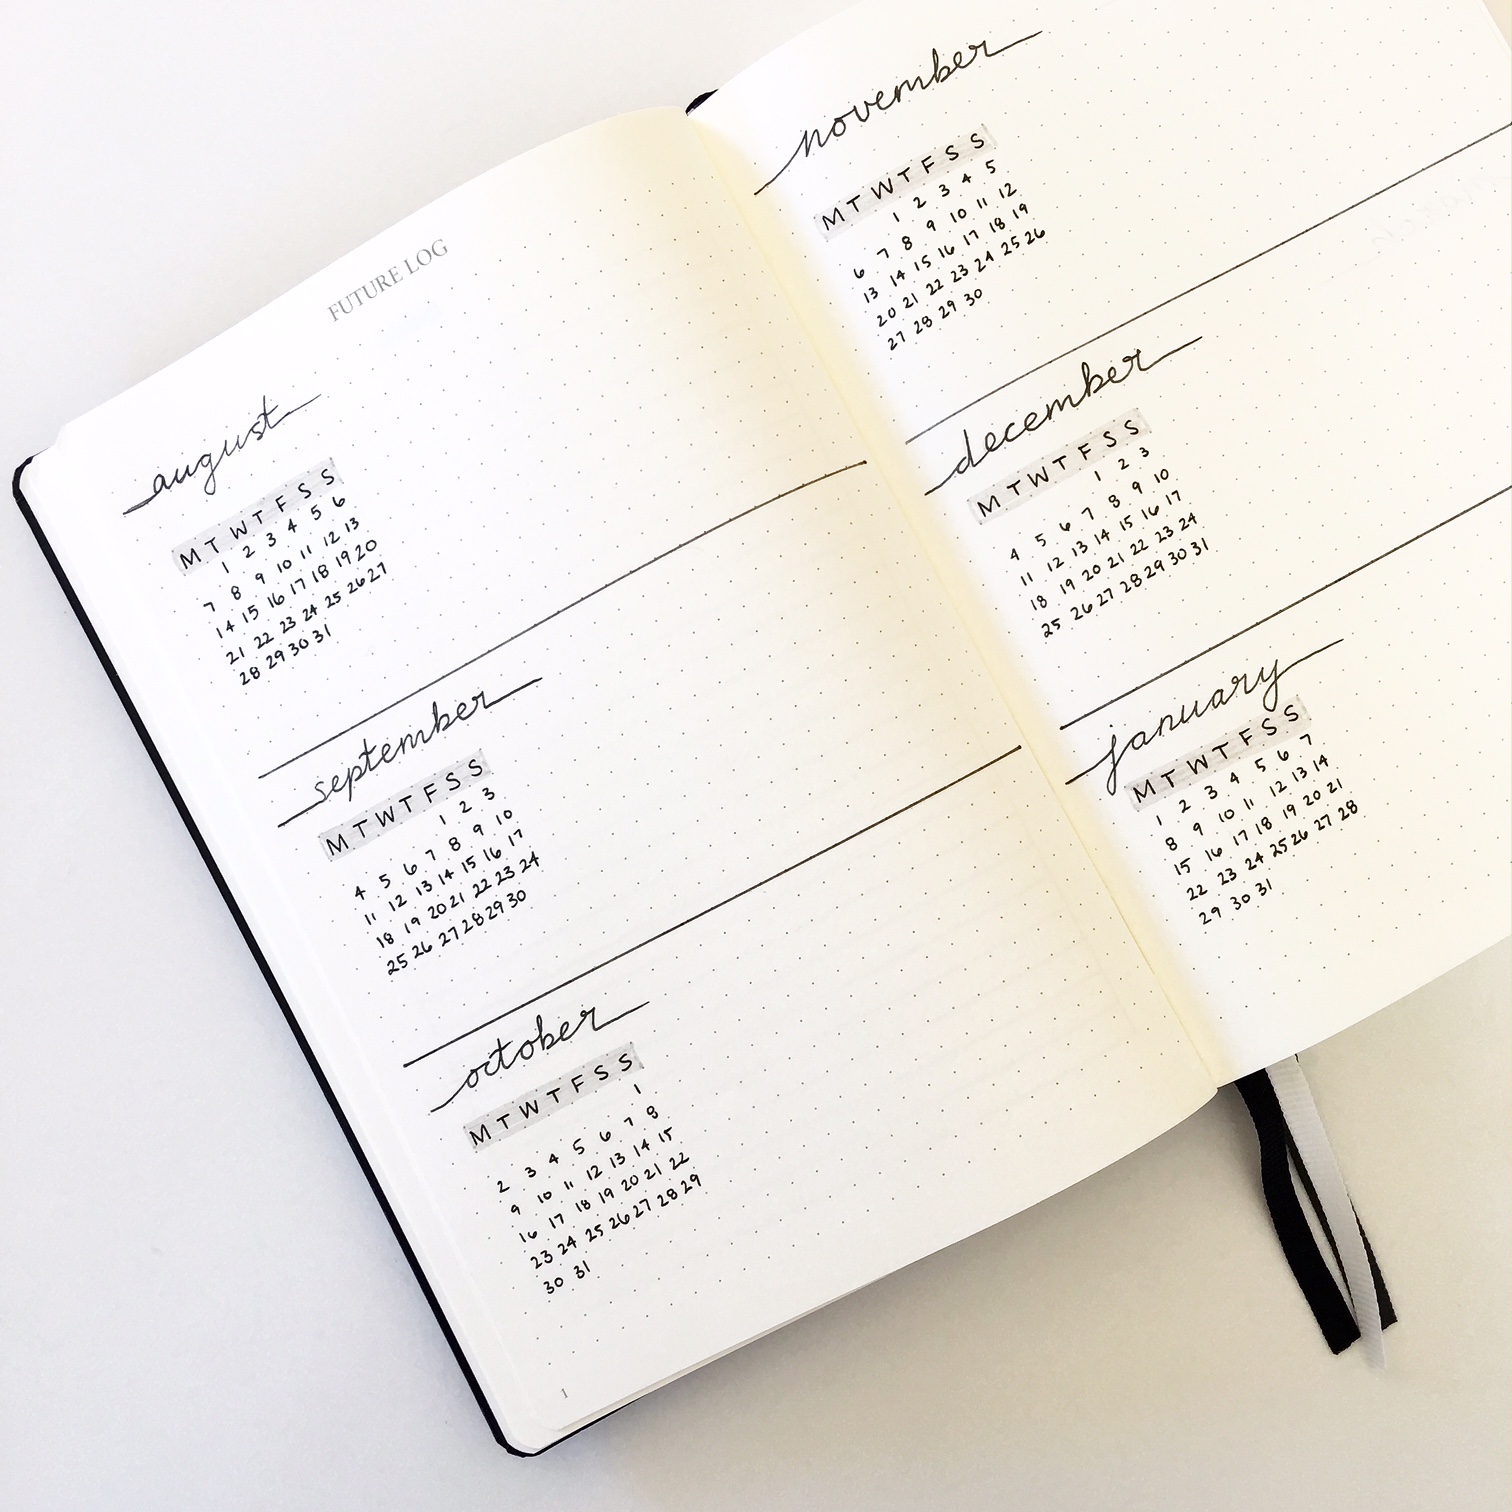 Bullet Journal Future Log Ideas You Need To See - The Smart Wander